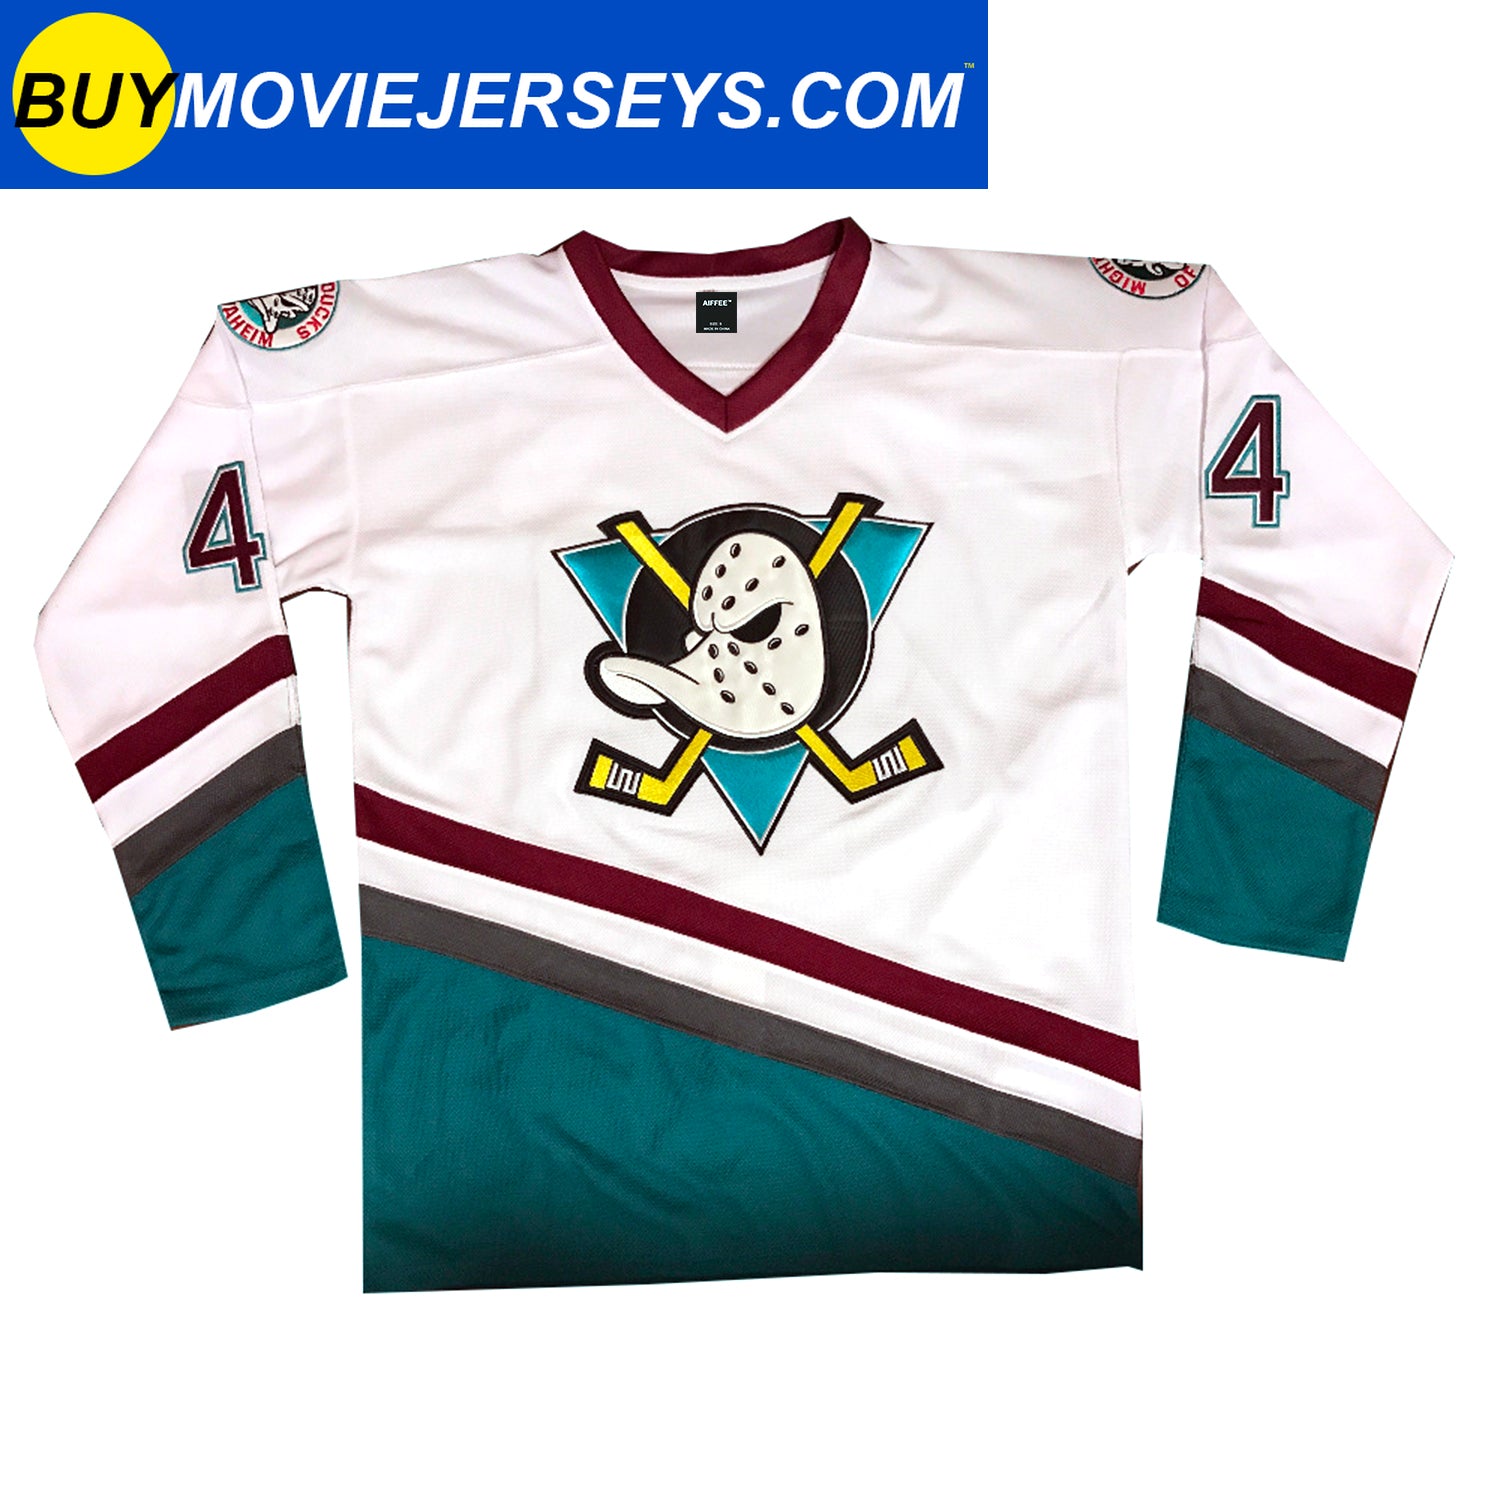 The Mighty Ducks Photos, News, Videos and Gallery, Just Jared Jr.